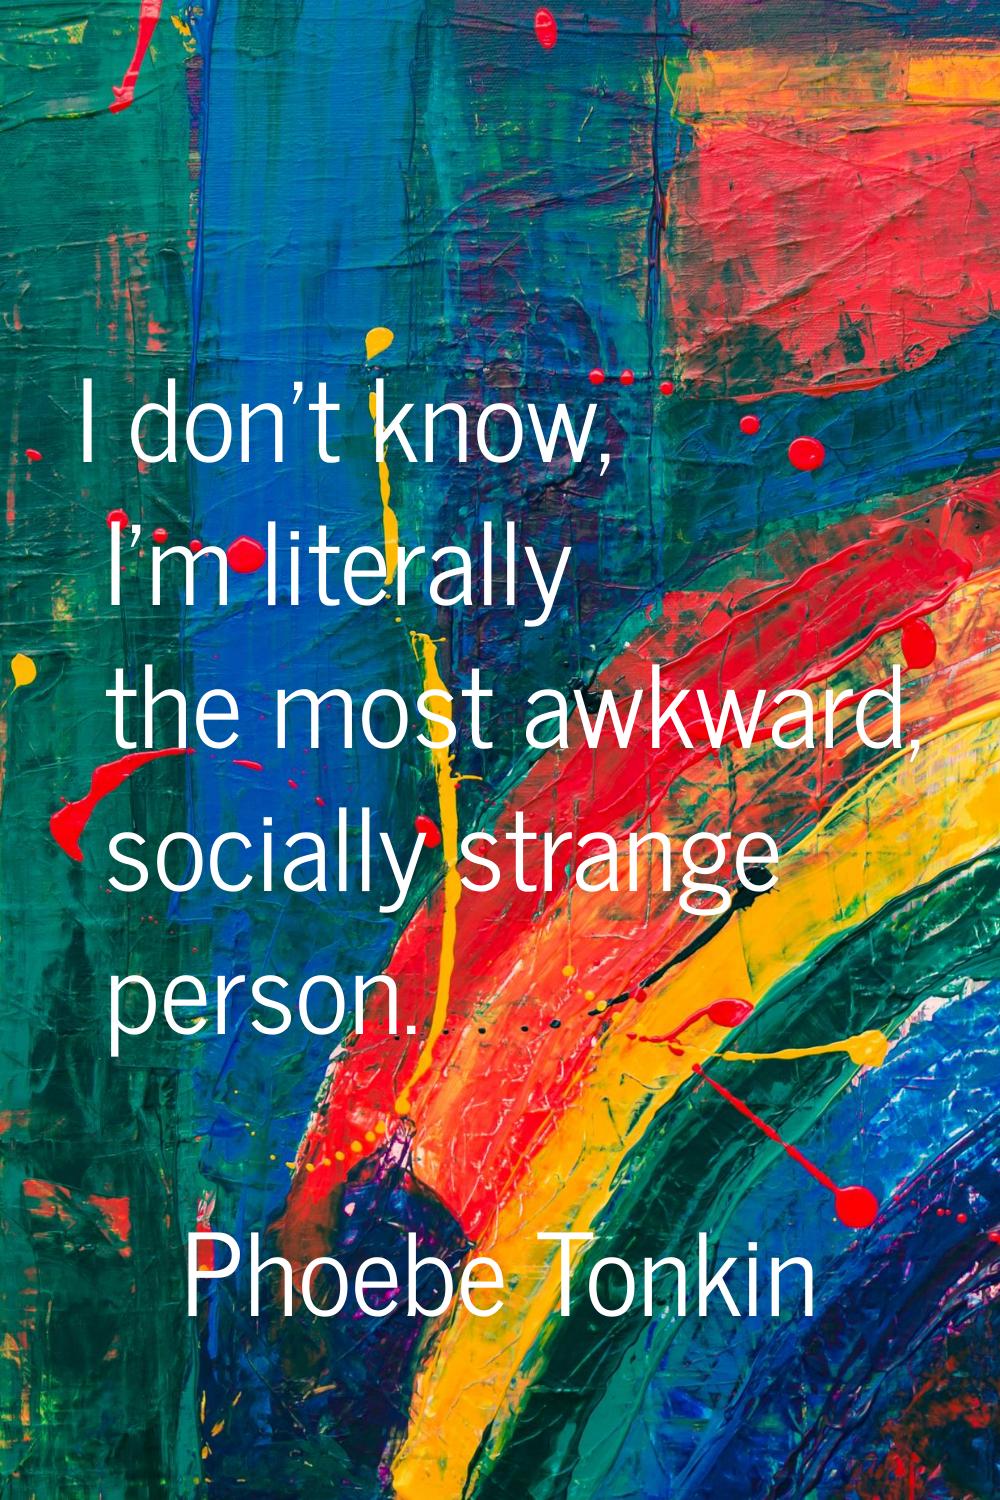 I don't know, I'm literally the most awkward, socially strange person.